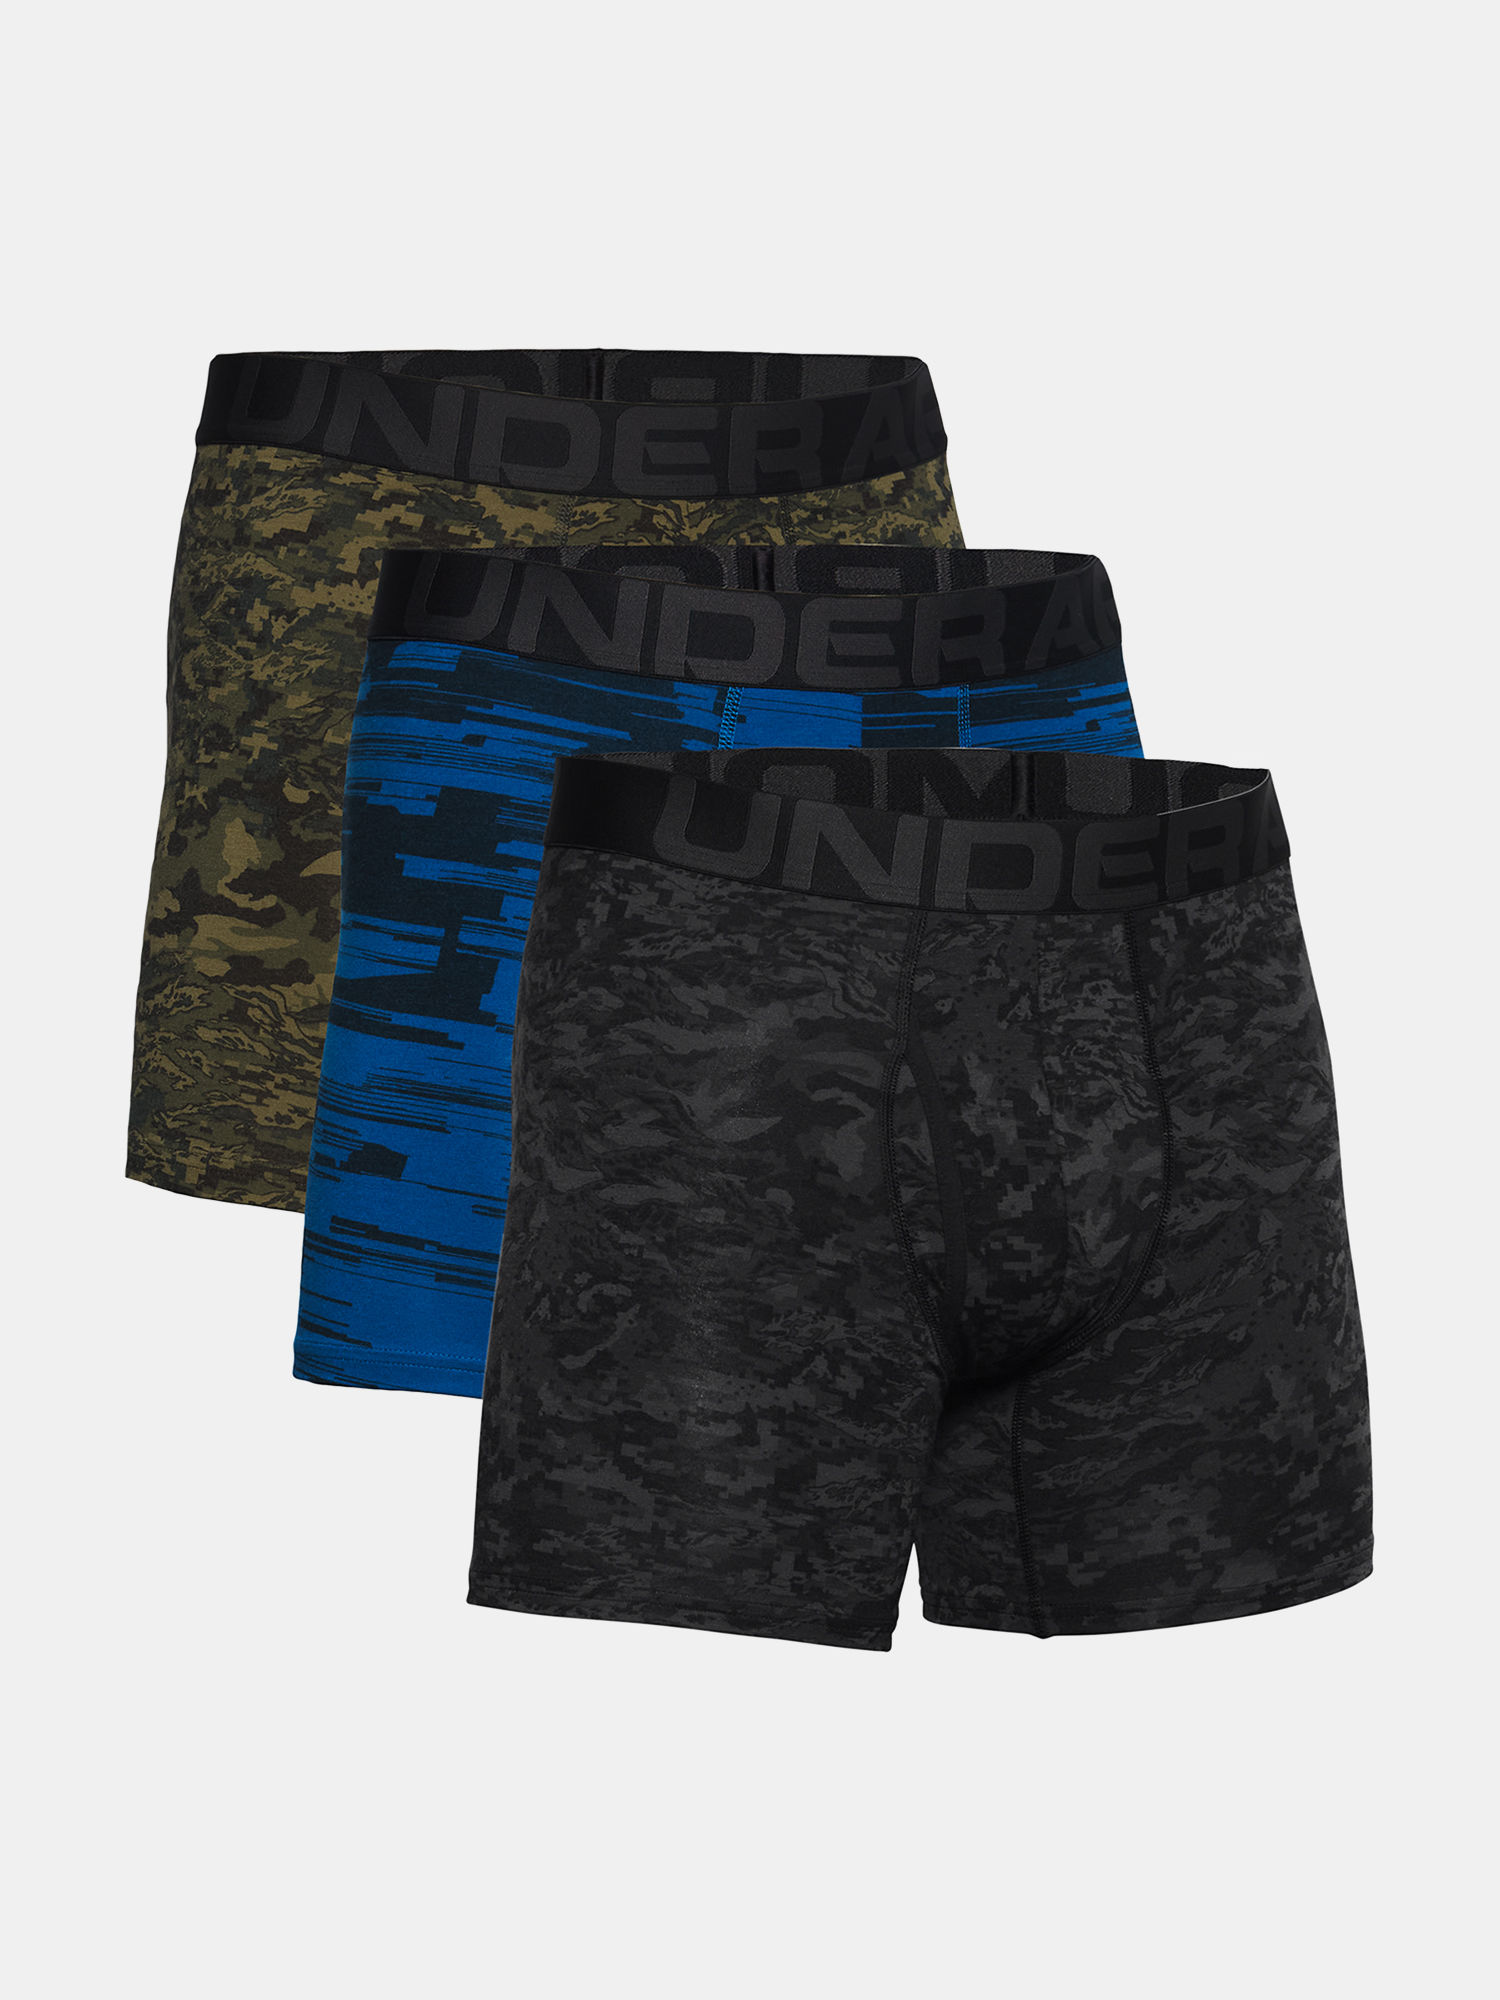 Boxerky Under Armour CC 6in Novelty 3 Pack-BLK (5)